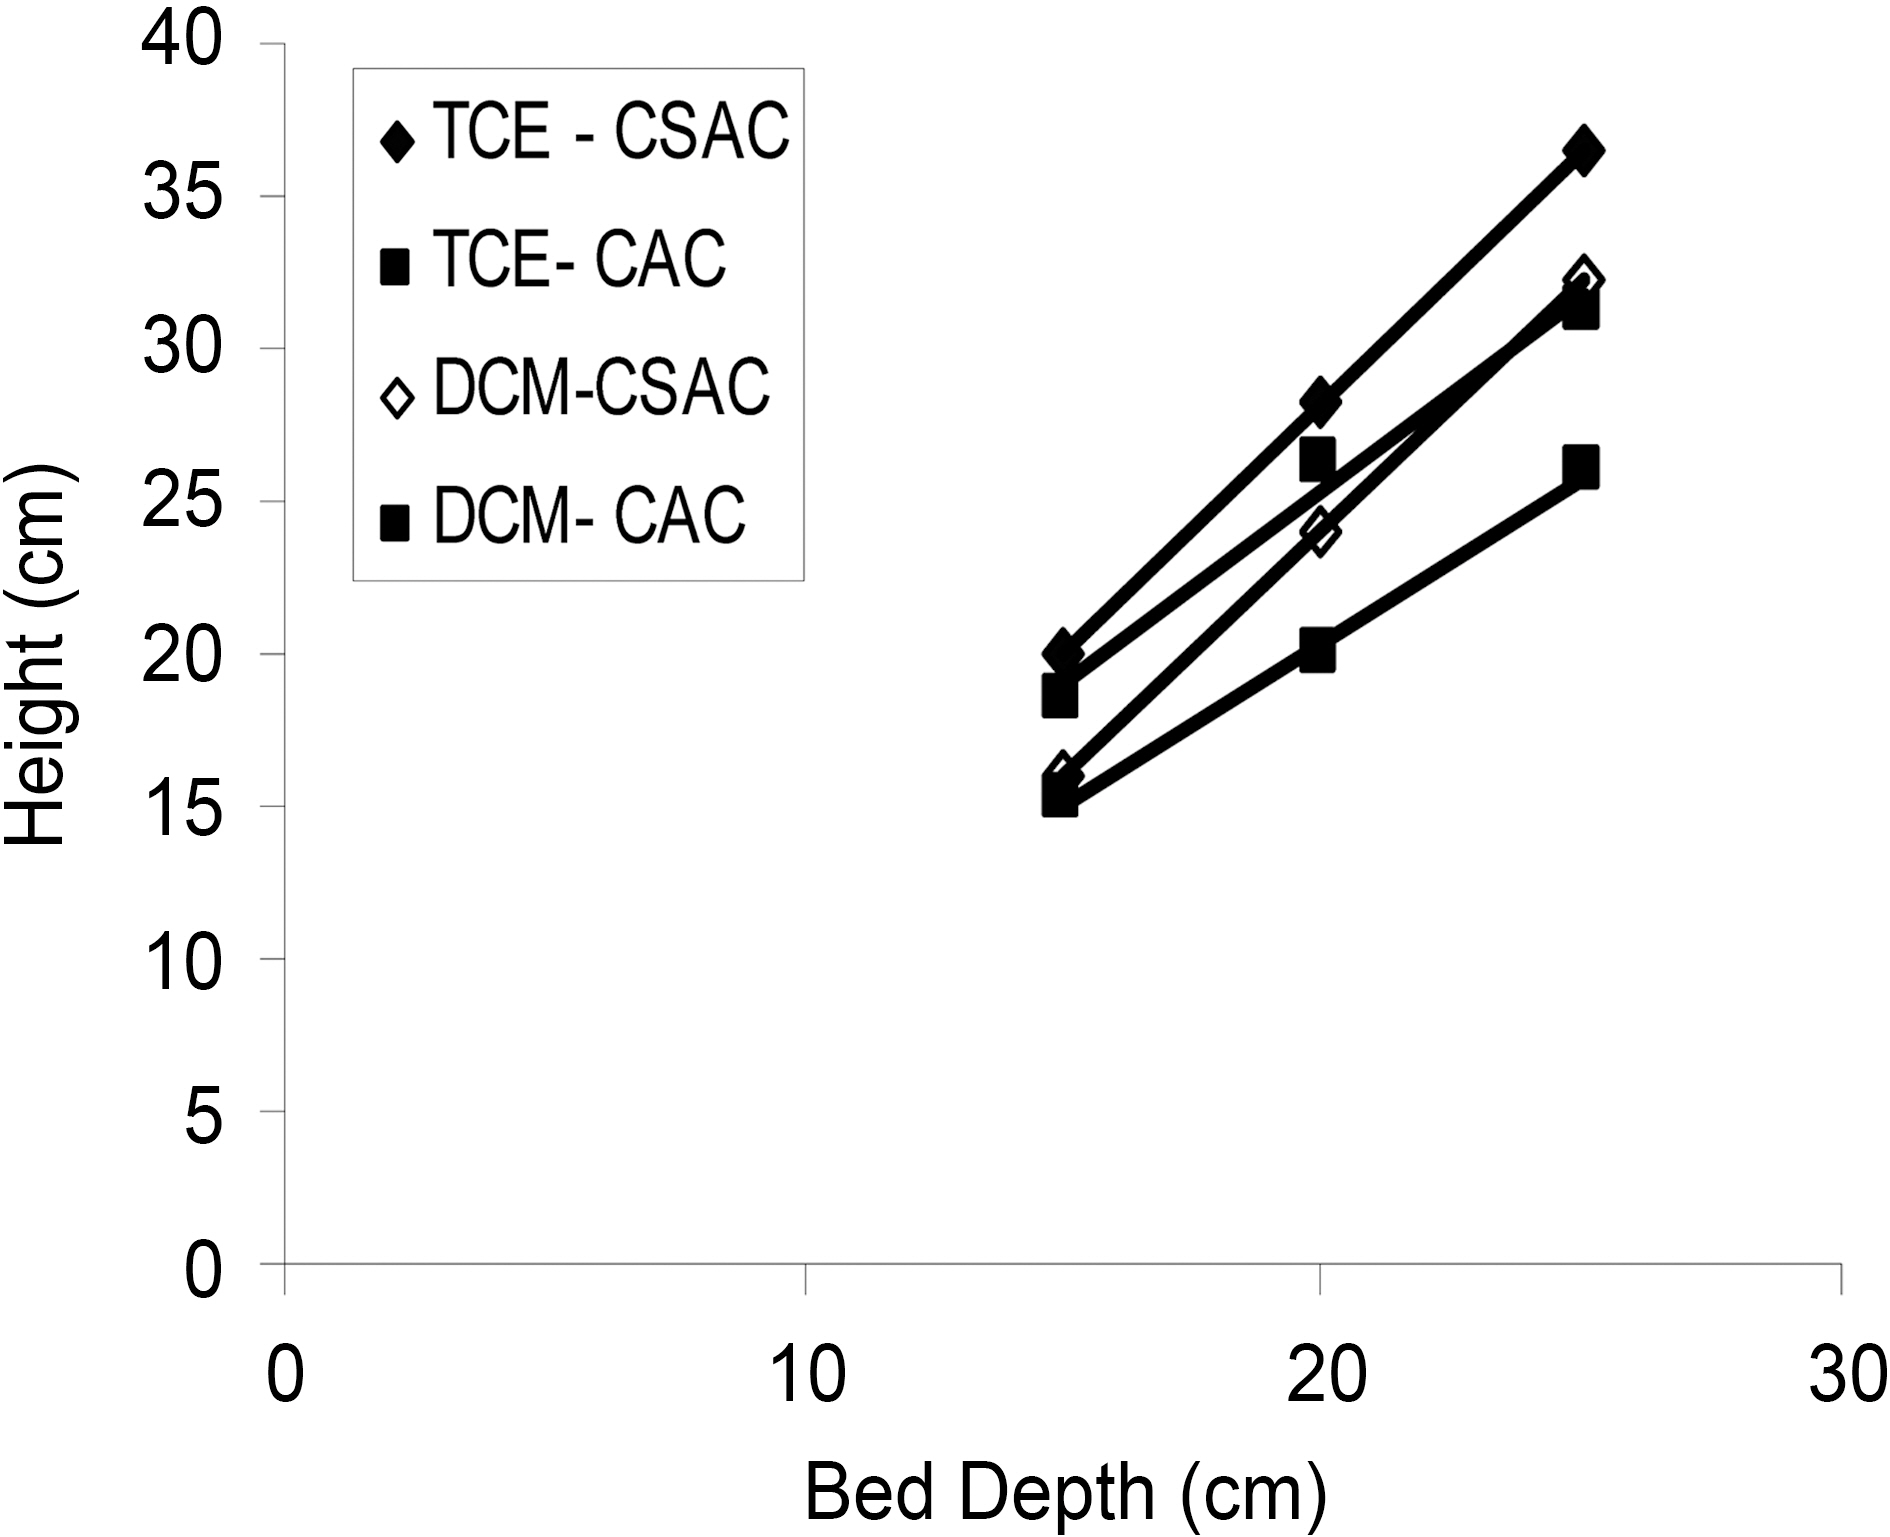 BDST model plots for TCE and DCM adsorption byCSAC and CAC.